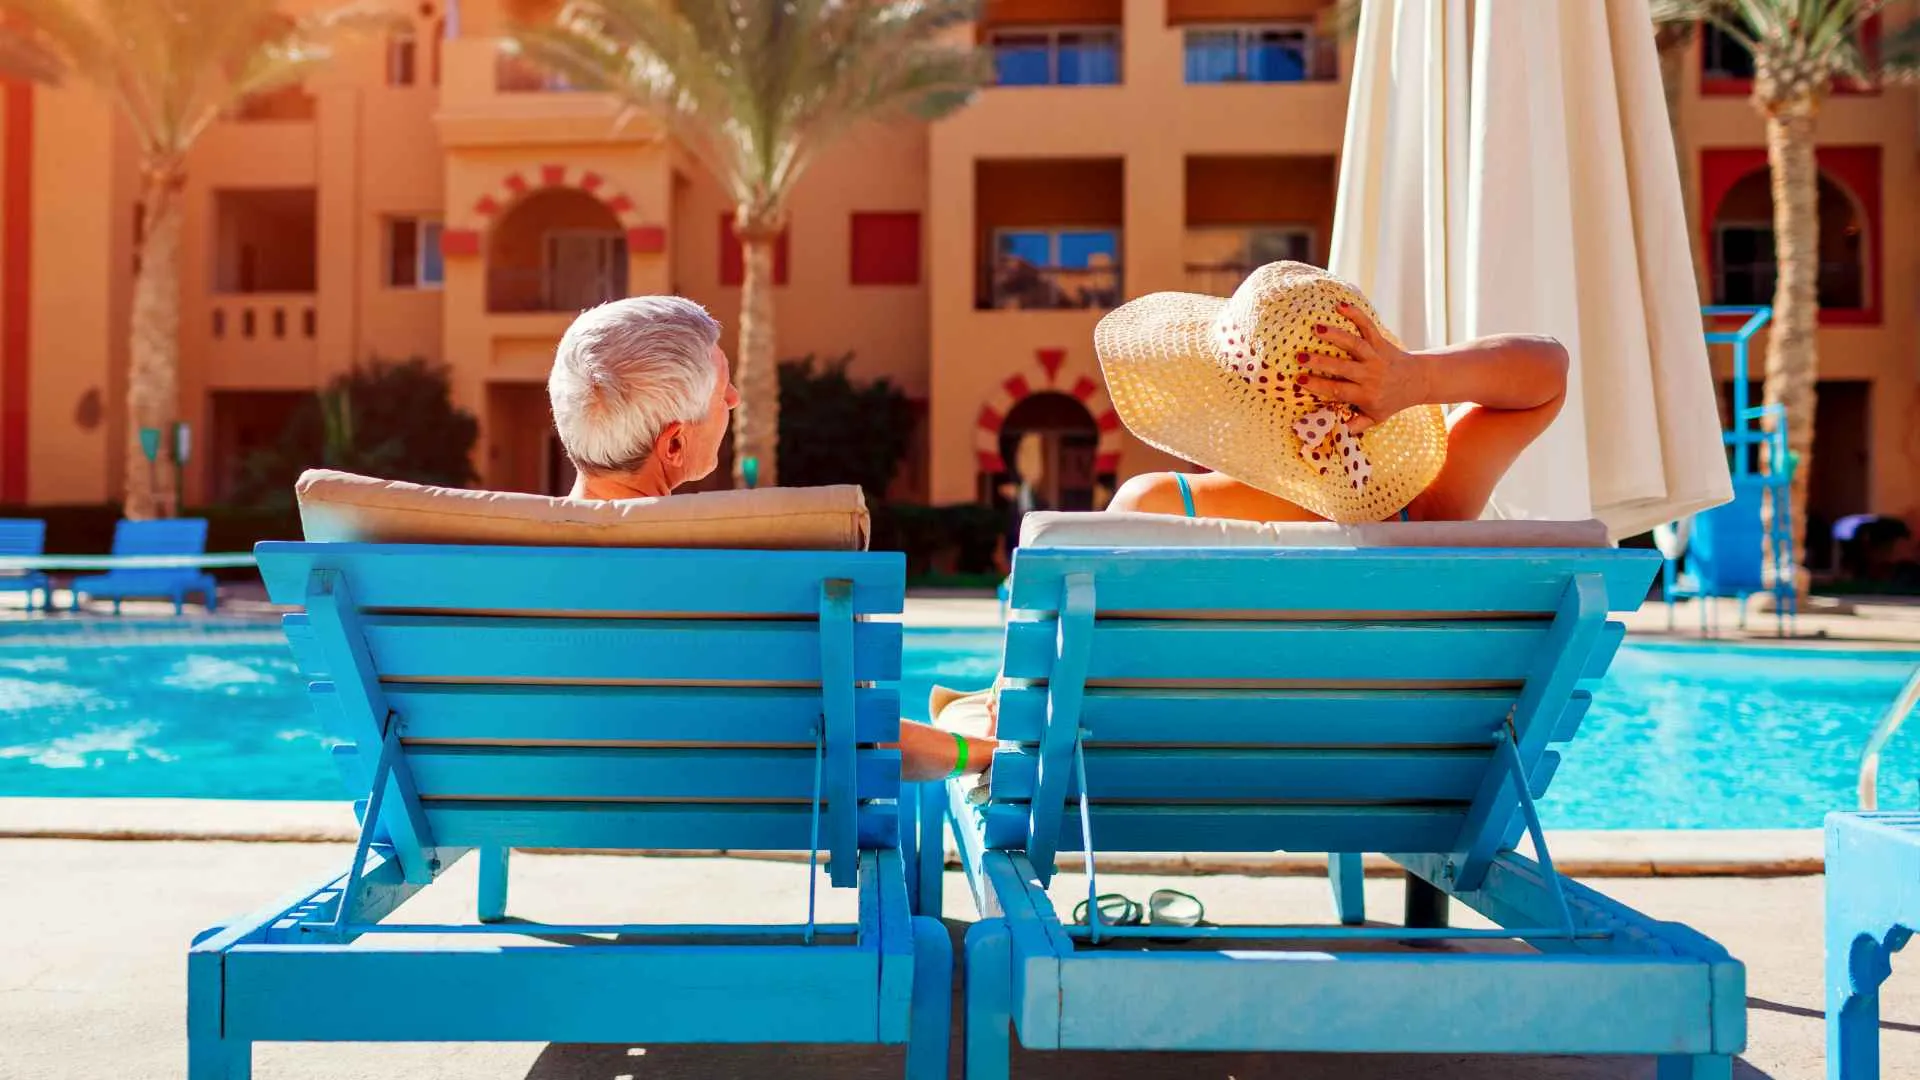 A senior couple relaxes while sitting by the pool in their blue lounge chairs.